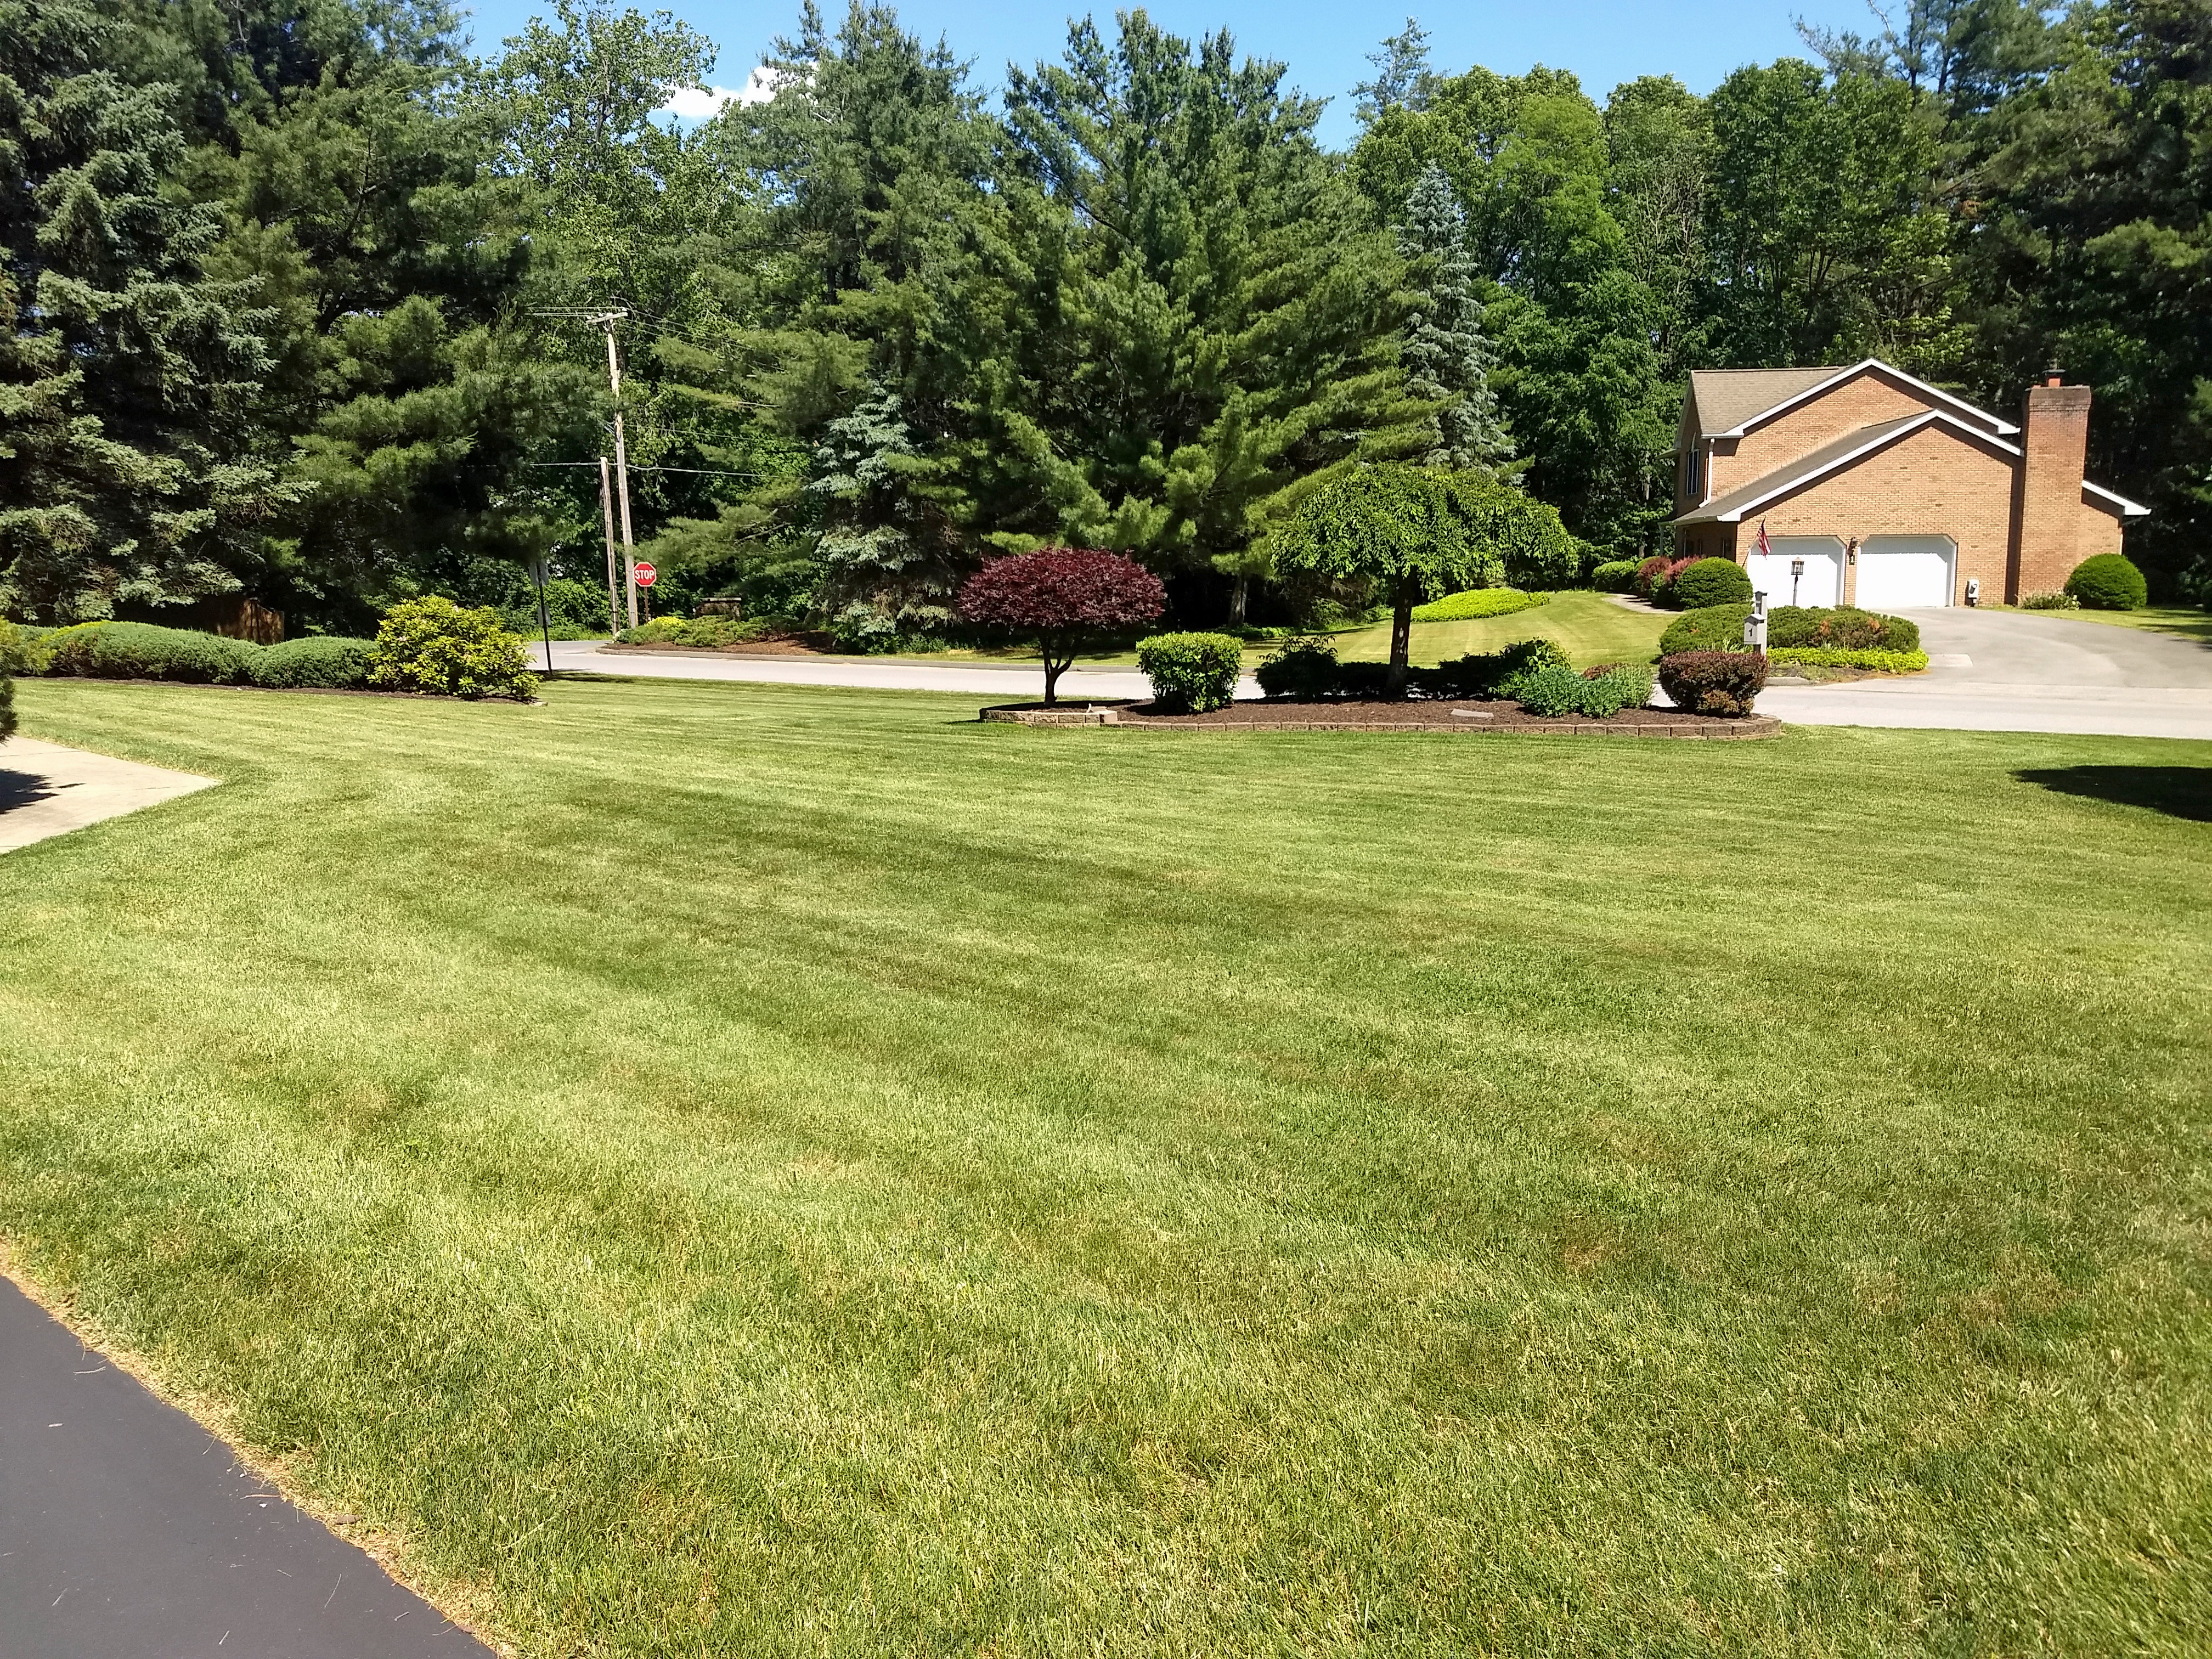 Thumbmnail image of a freshly mowed lawn and a weeded plantbed